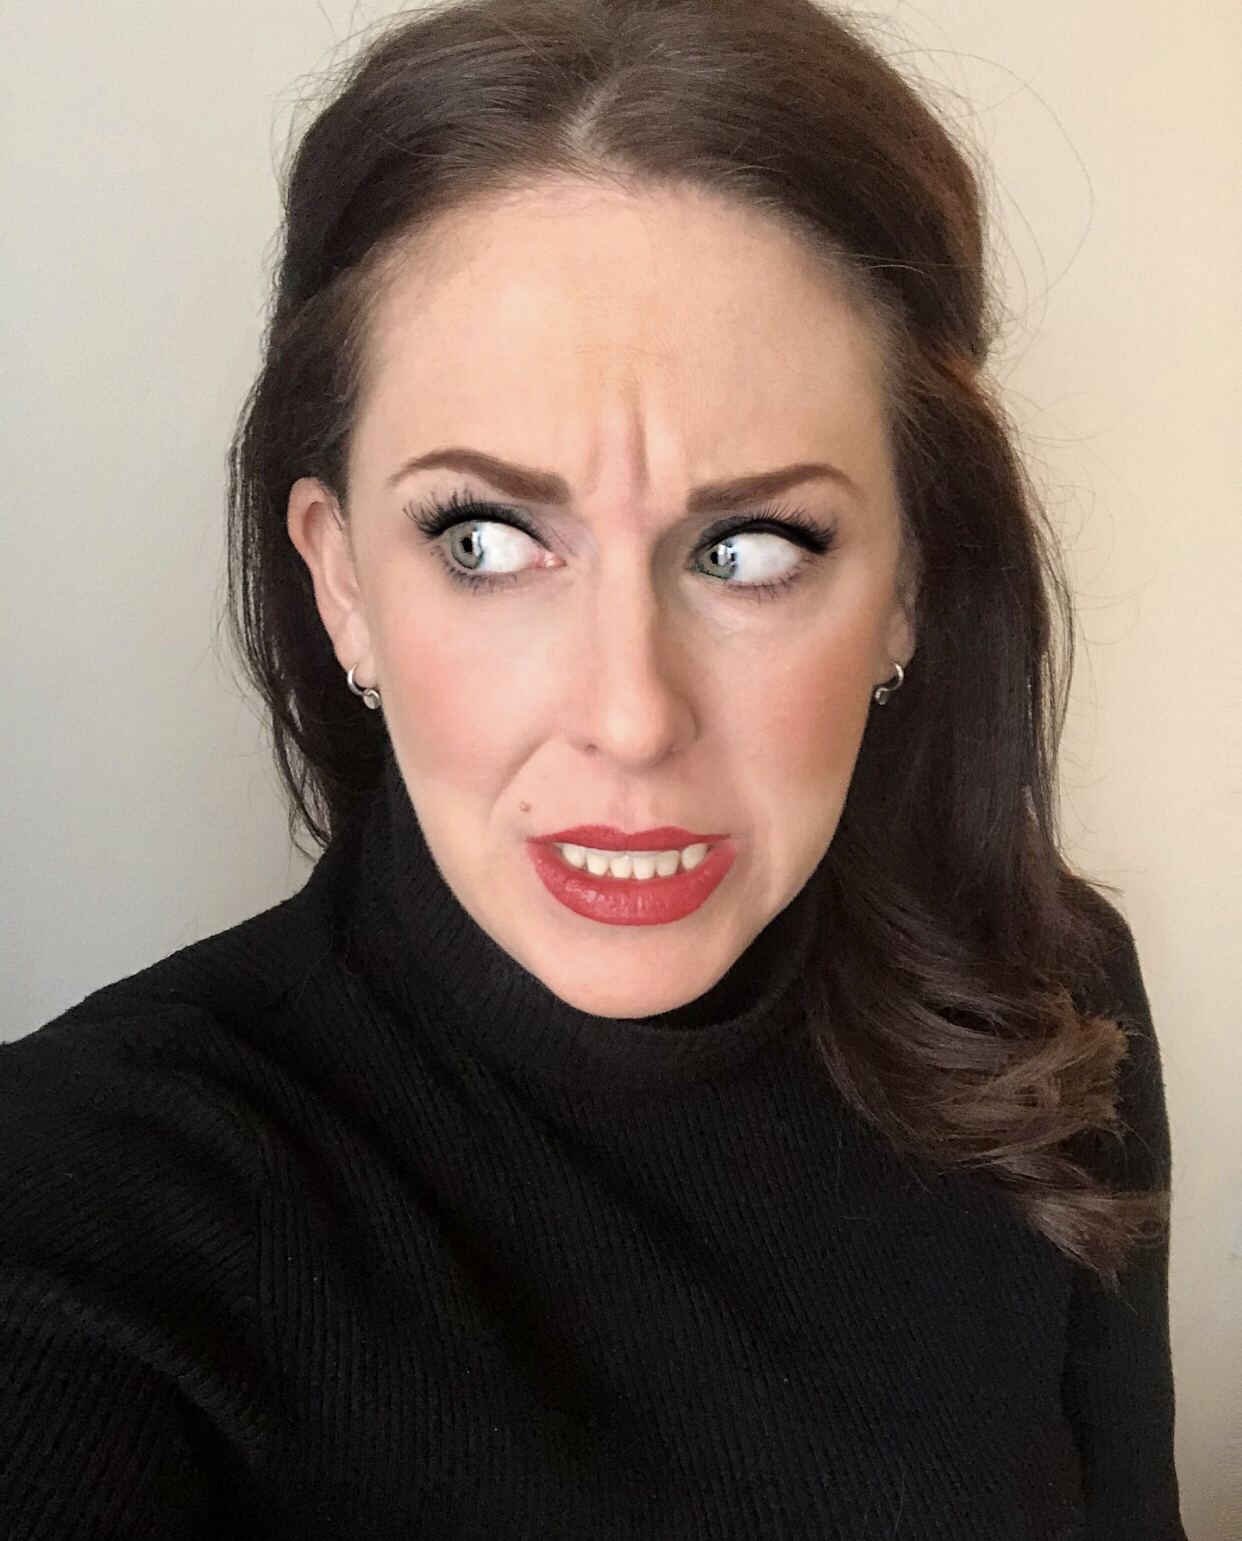 This is my “I-did-what?!” face - normally reserved for the morning after a few too many glasses of bubbles, but this time this look of horror as the result of my first spending analysis on the Emma app.